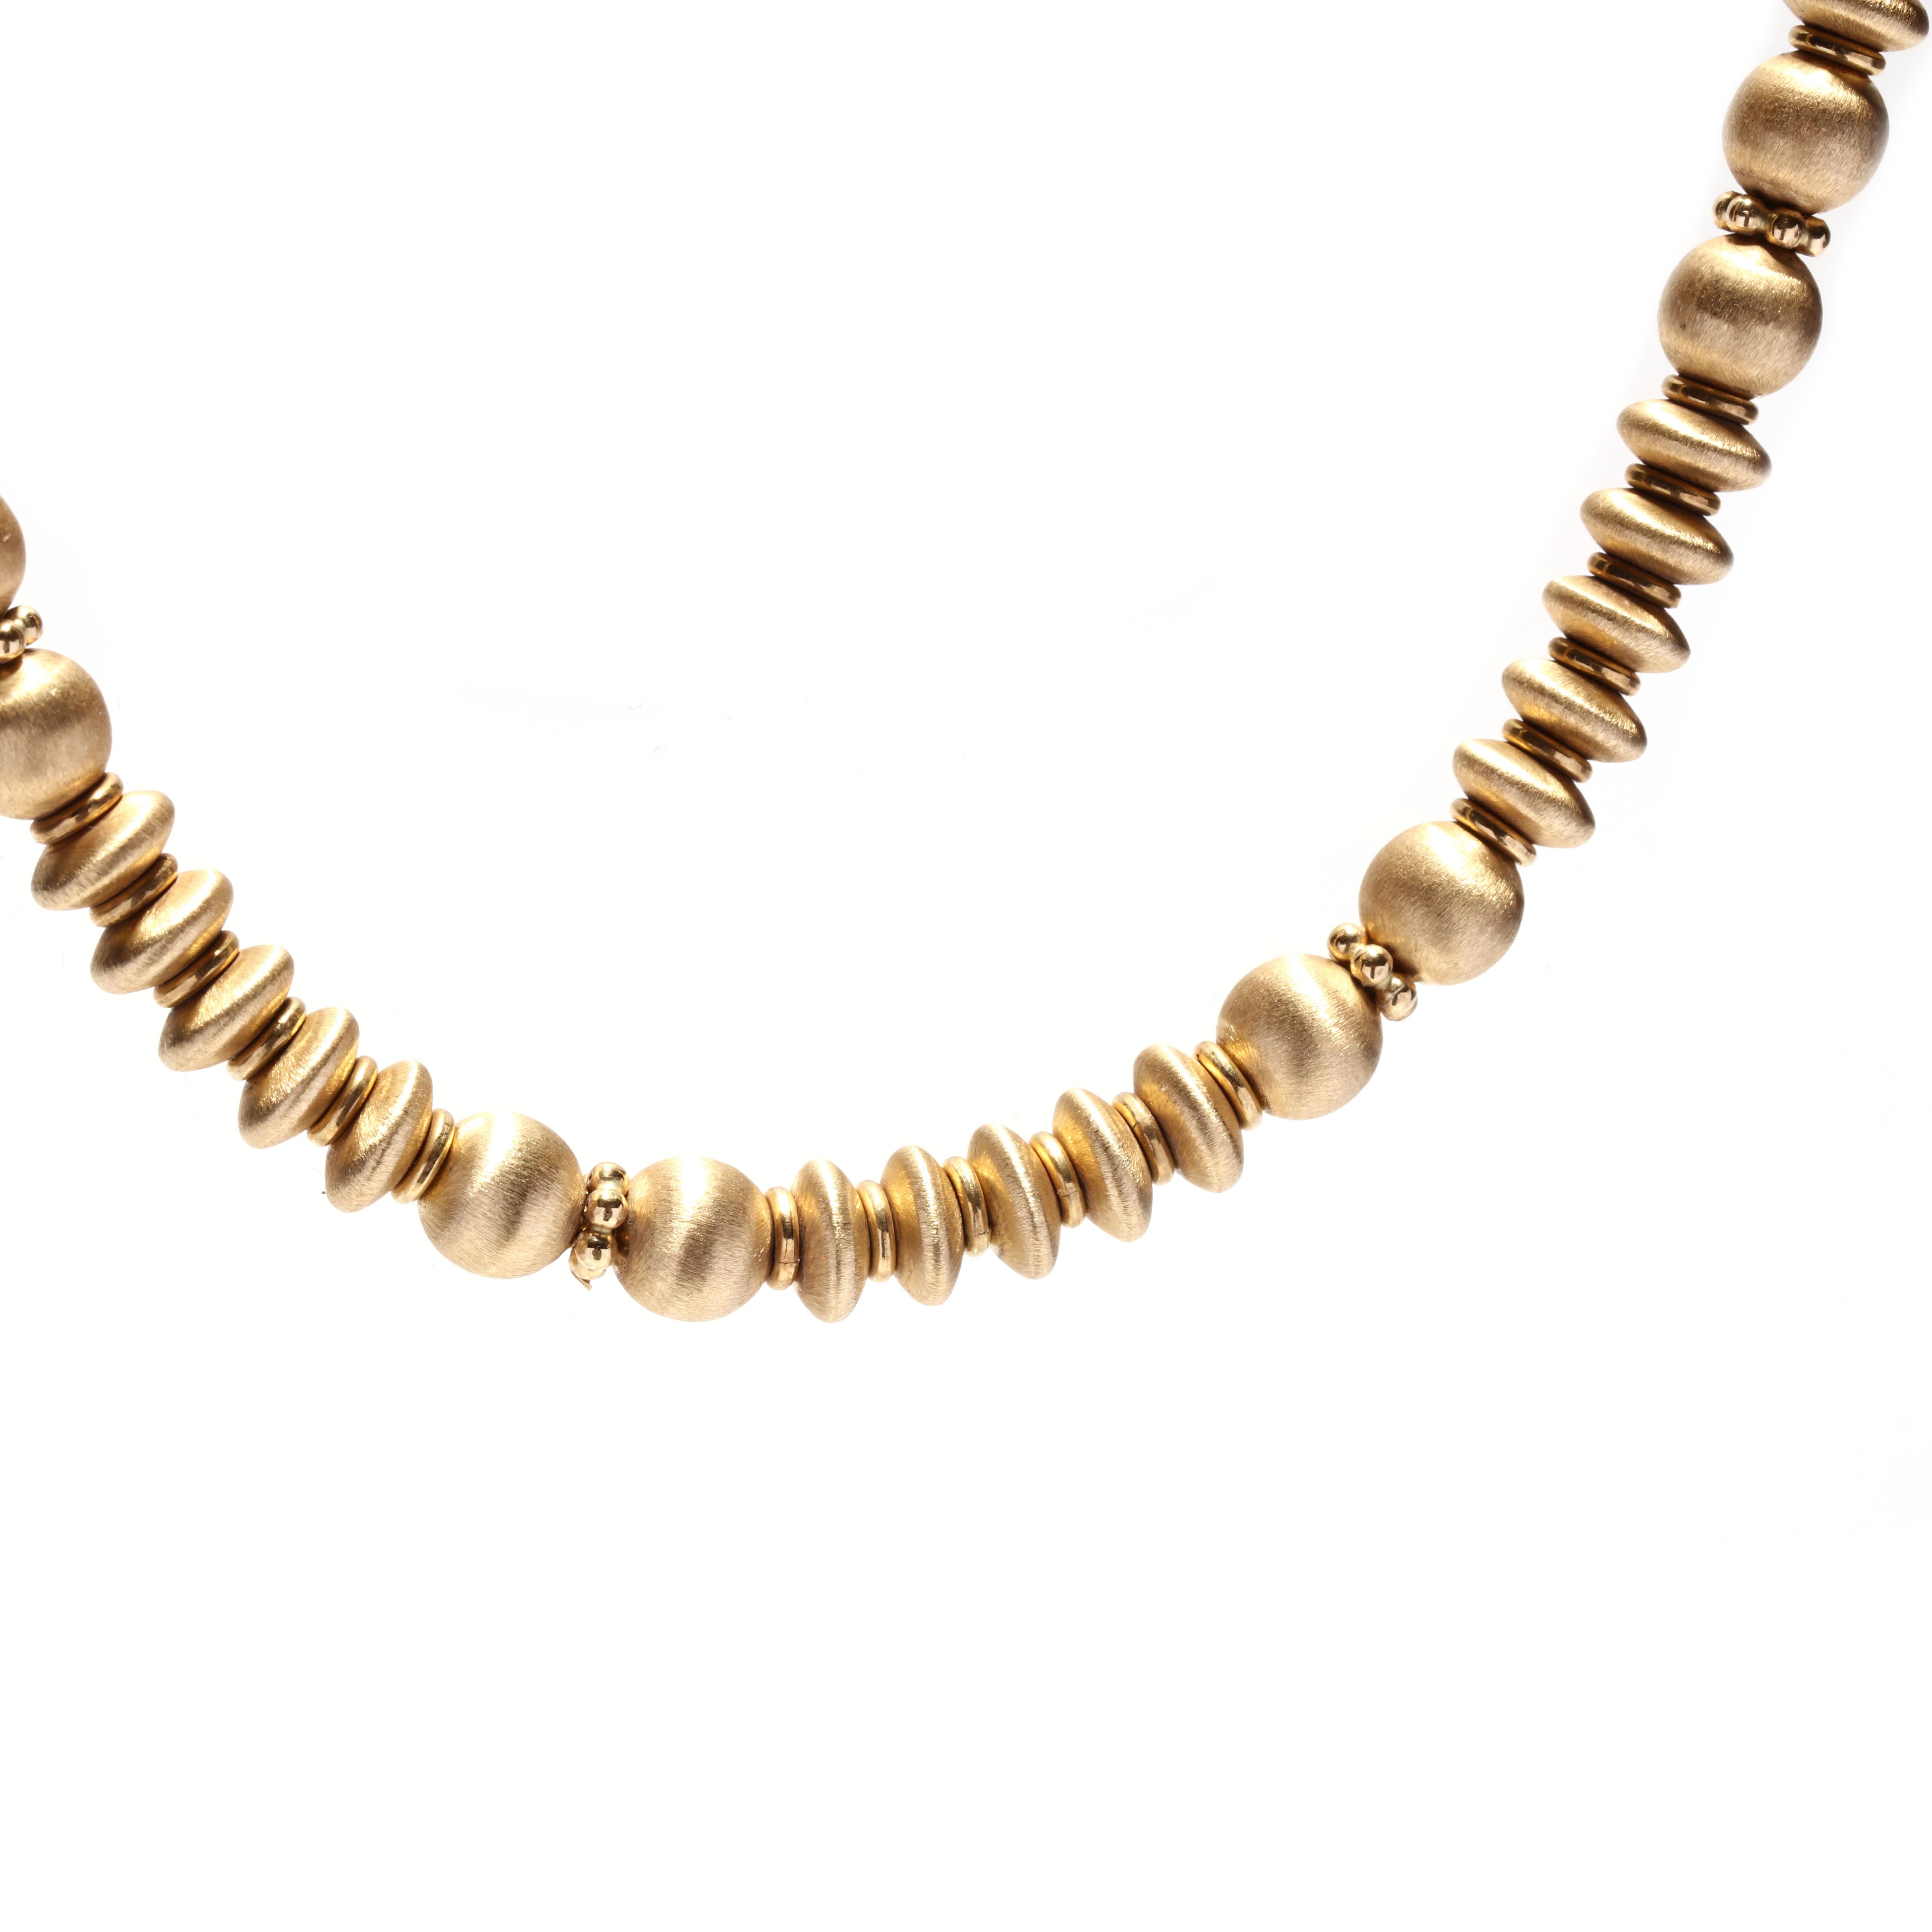 A vintage Italian 18 karat yellow gold Italian bead necklace.  This necklace is comprised of brushed gold round and rondelle shaped beads, has a ball closure, and is marked 750 *1652 VI. 

Length: 17.5 in.

Width: 6 mm

Weight: 27.5 dwts. / 42.7